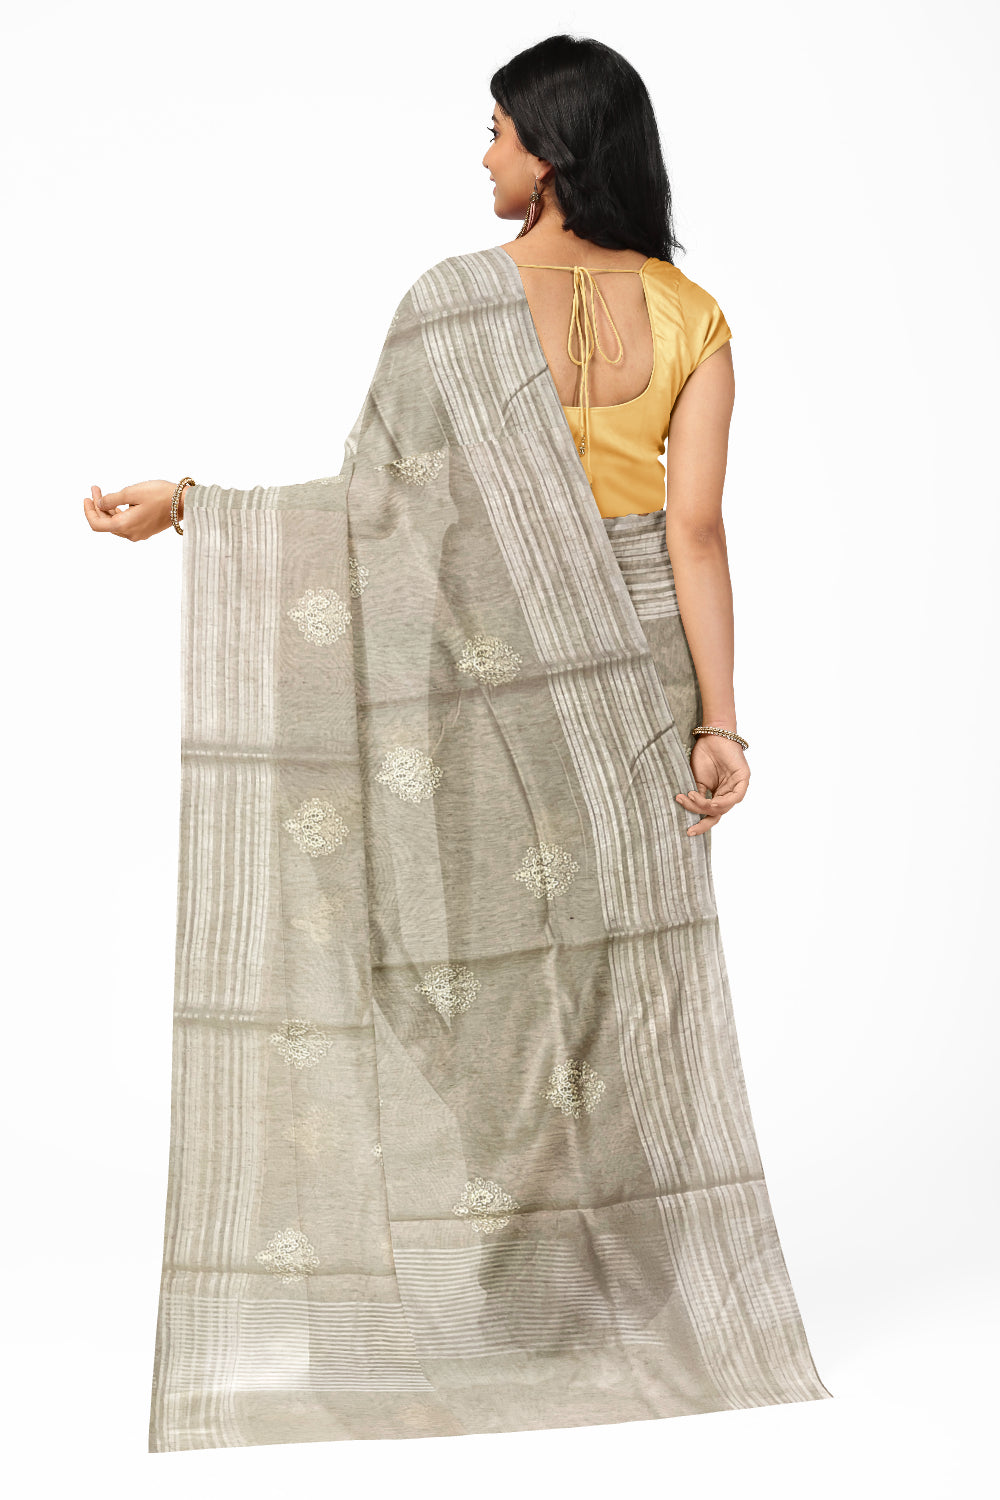 Southloom Cotton Off-White Saree with Floral Thread Works